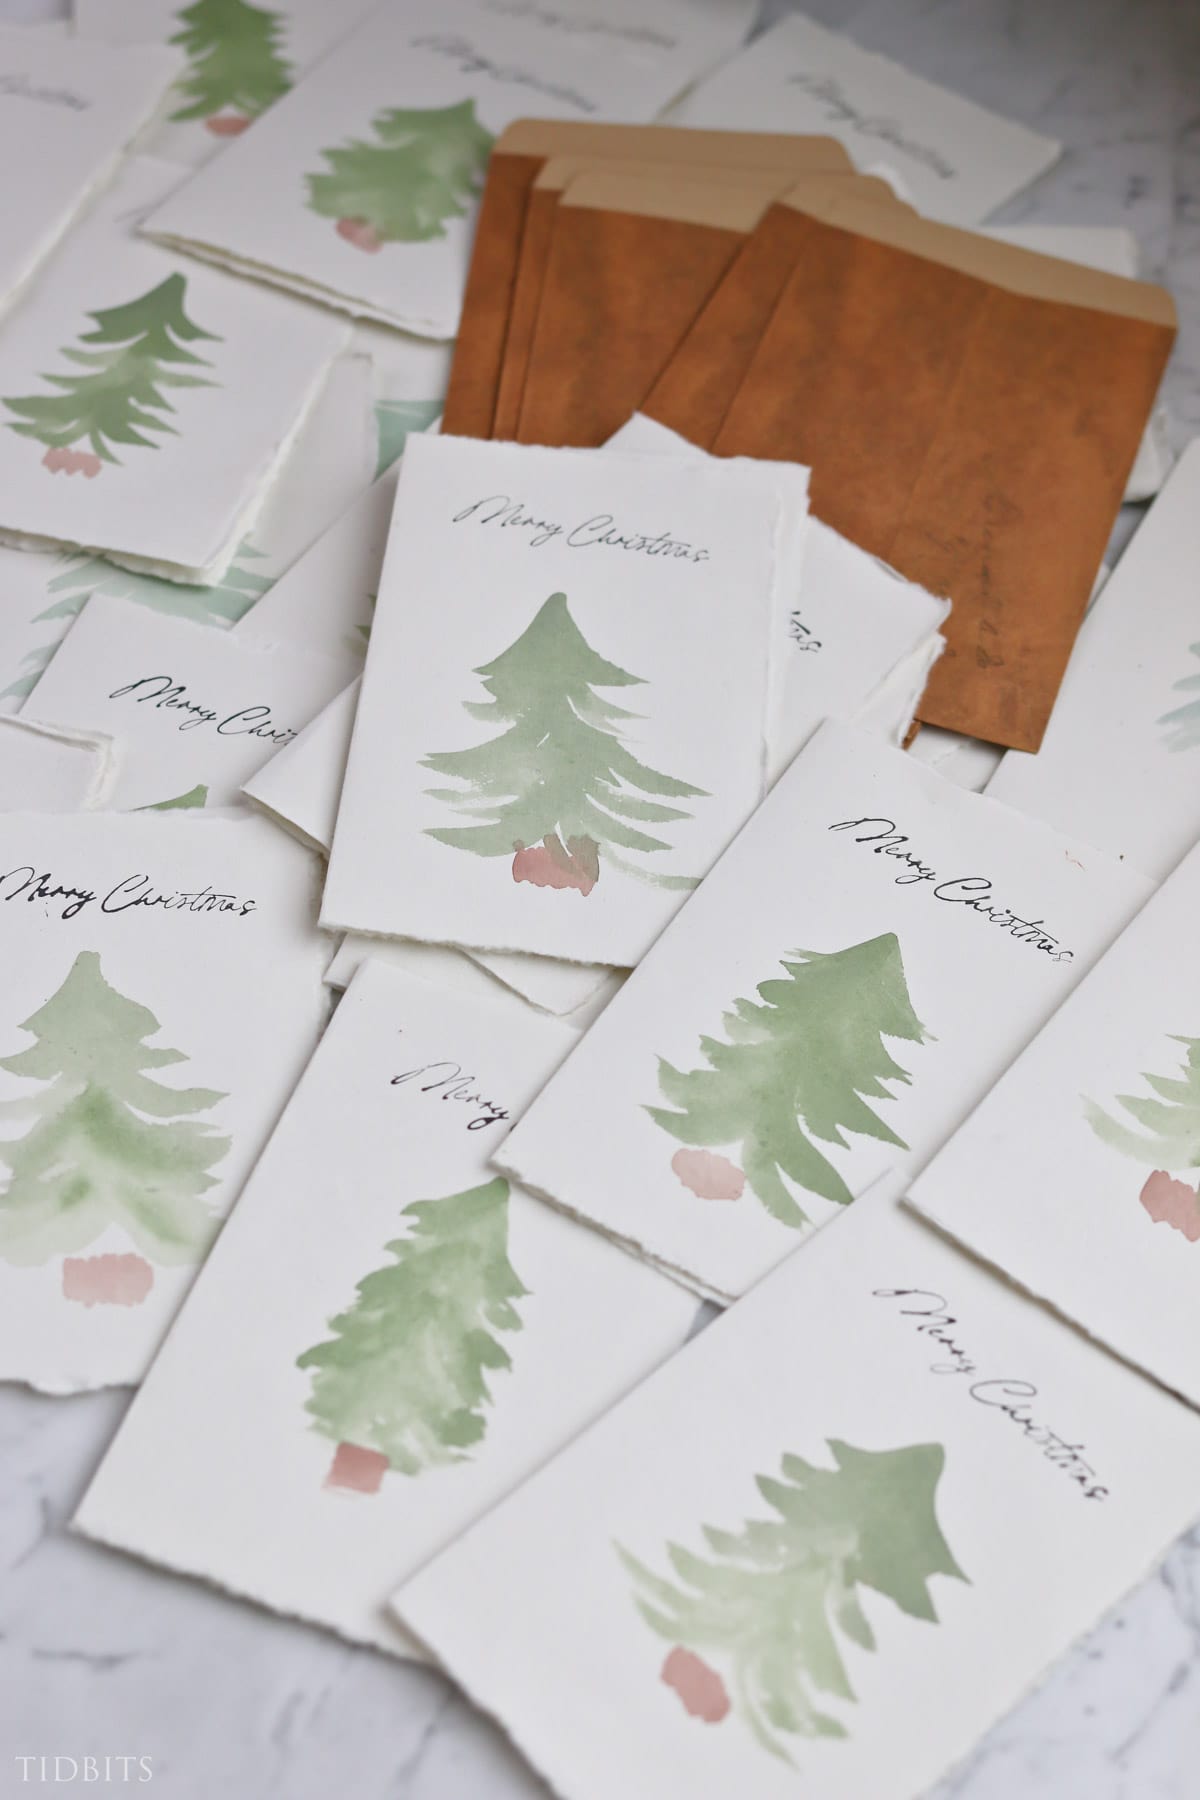 Super easy and beautiful DIY watercolor Christmas Cards